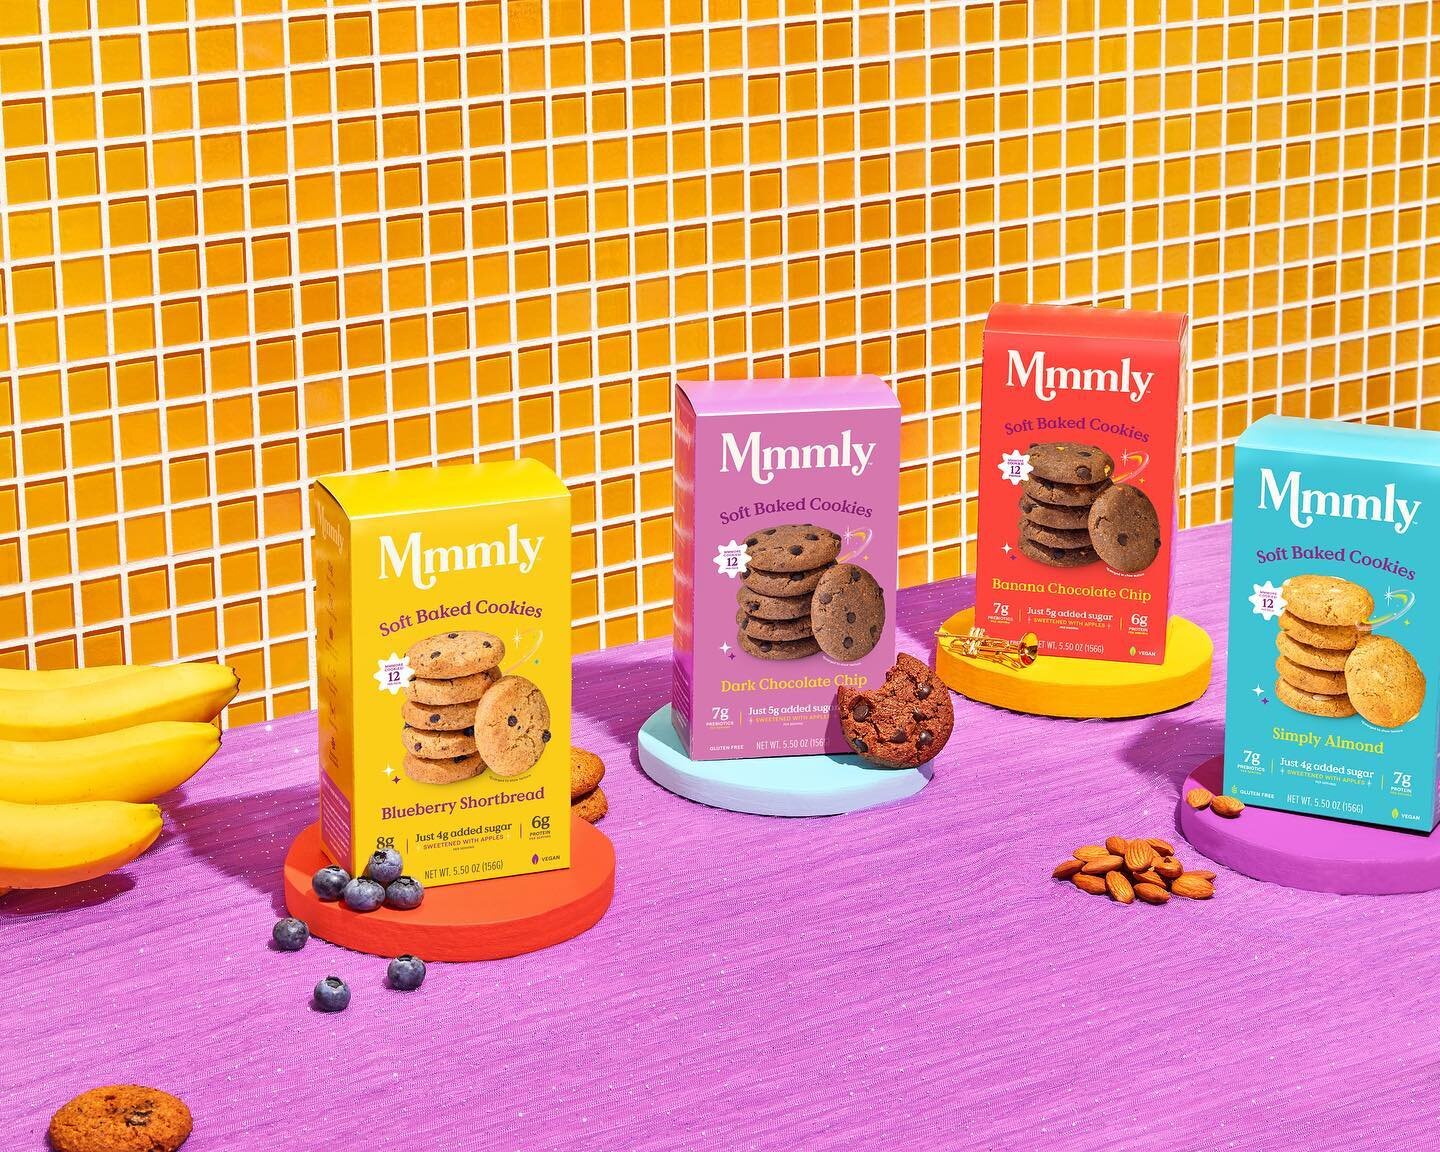 Very excited to share the work we did last year for @eatmmmly 🍪

We worked with Mmmly to update their packaging and communication hierarchy for their soft baked, guilt-free, *nutritiously* delicious cookies. We concluded the hierarchy on the front o